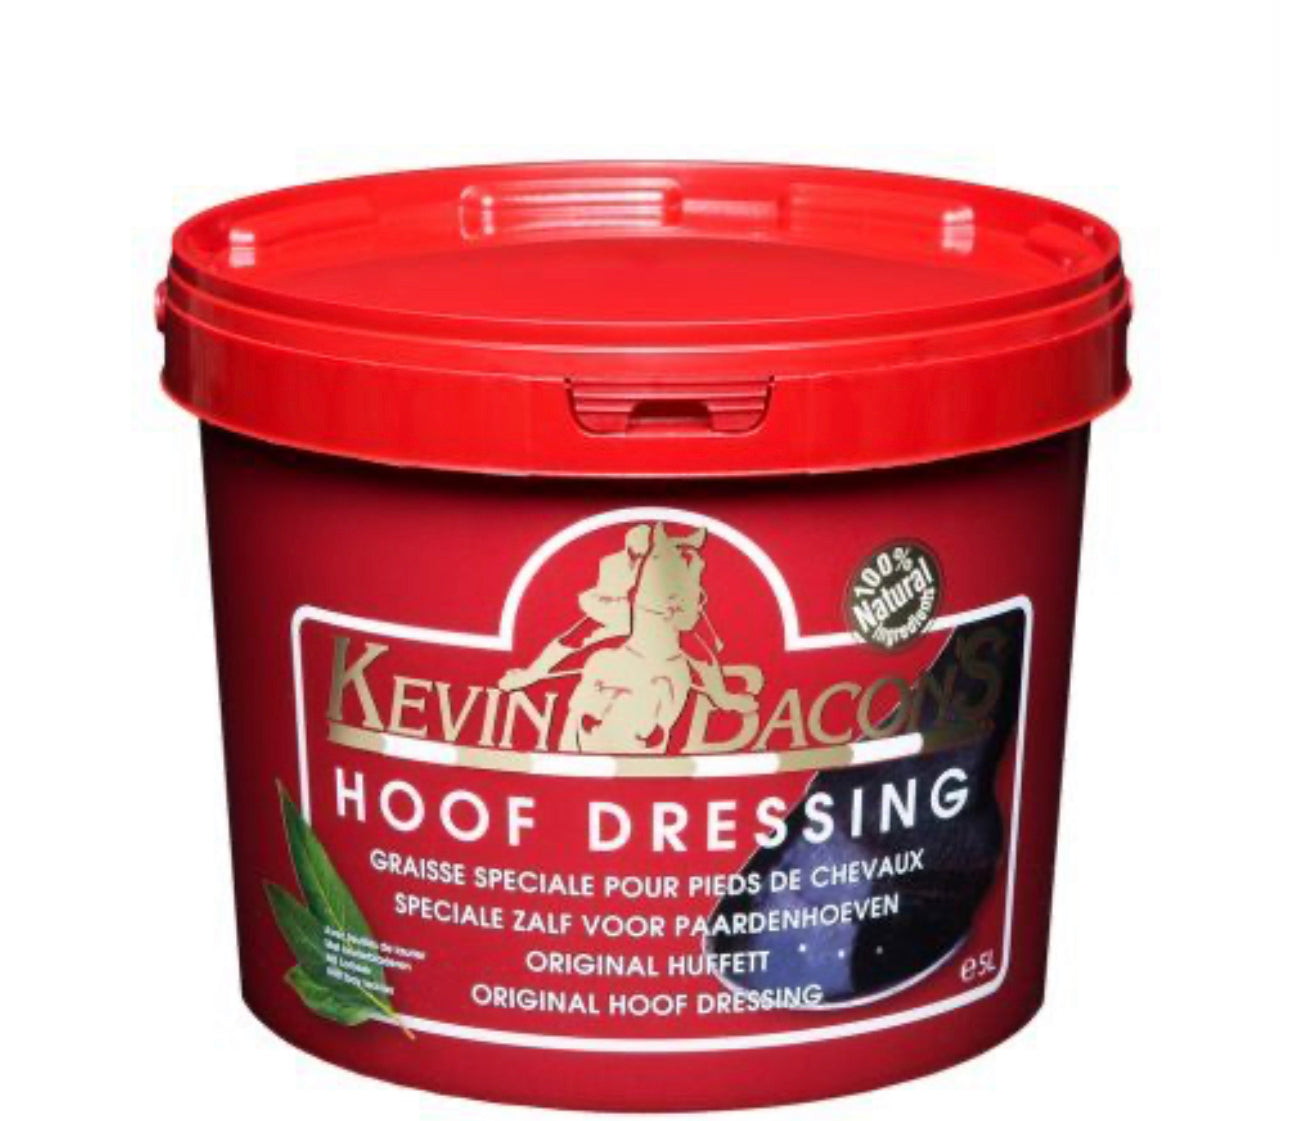 Kevin Bacon's Hoof Dressing Blond